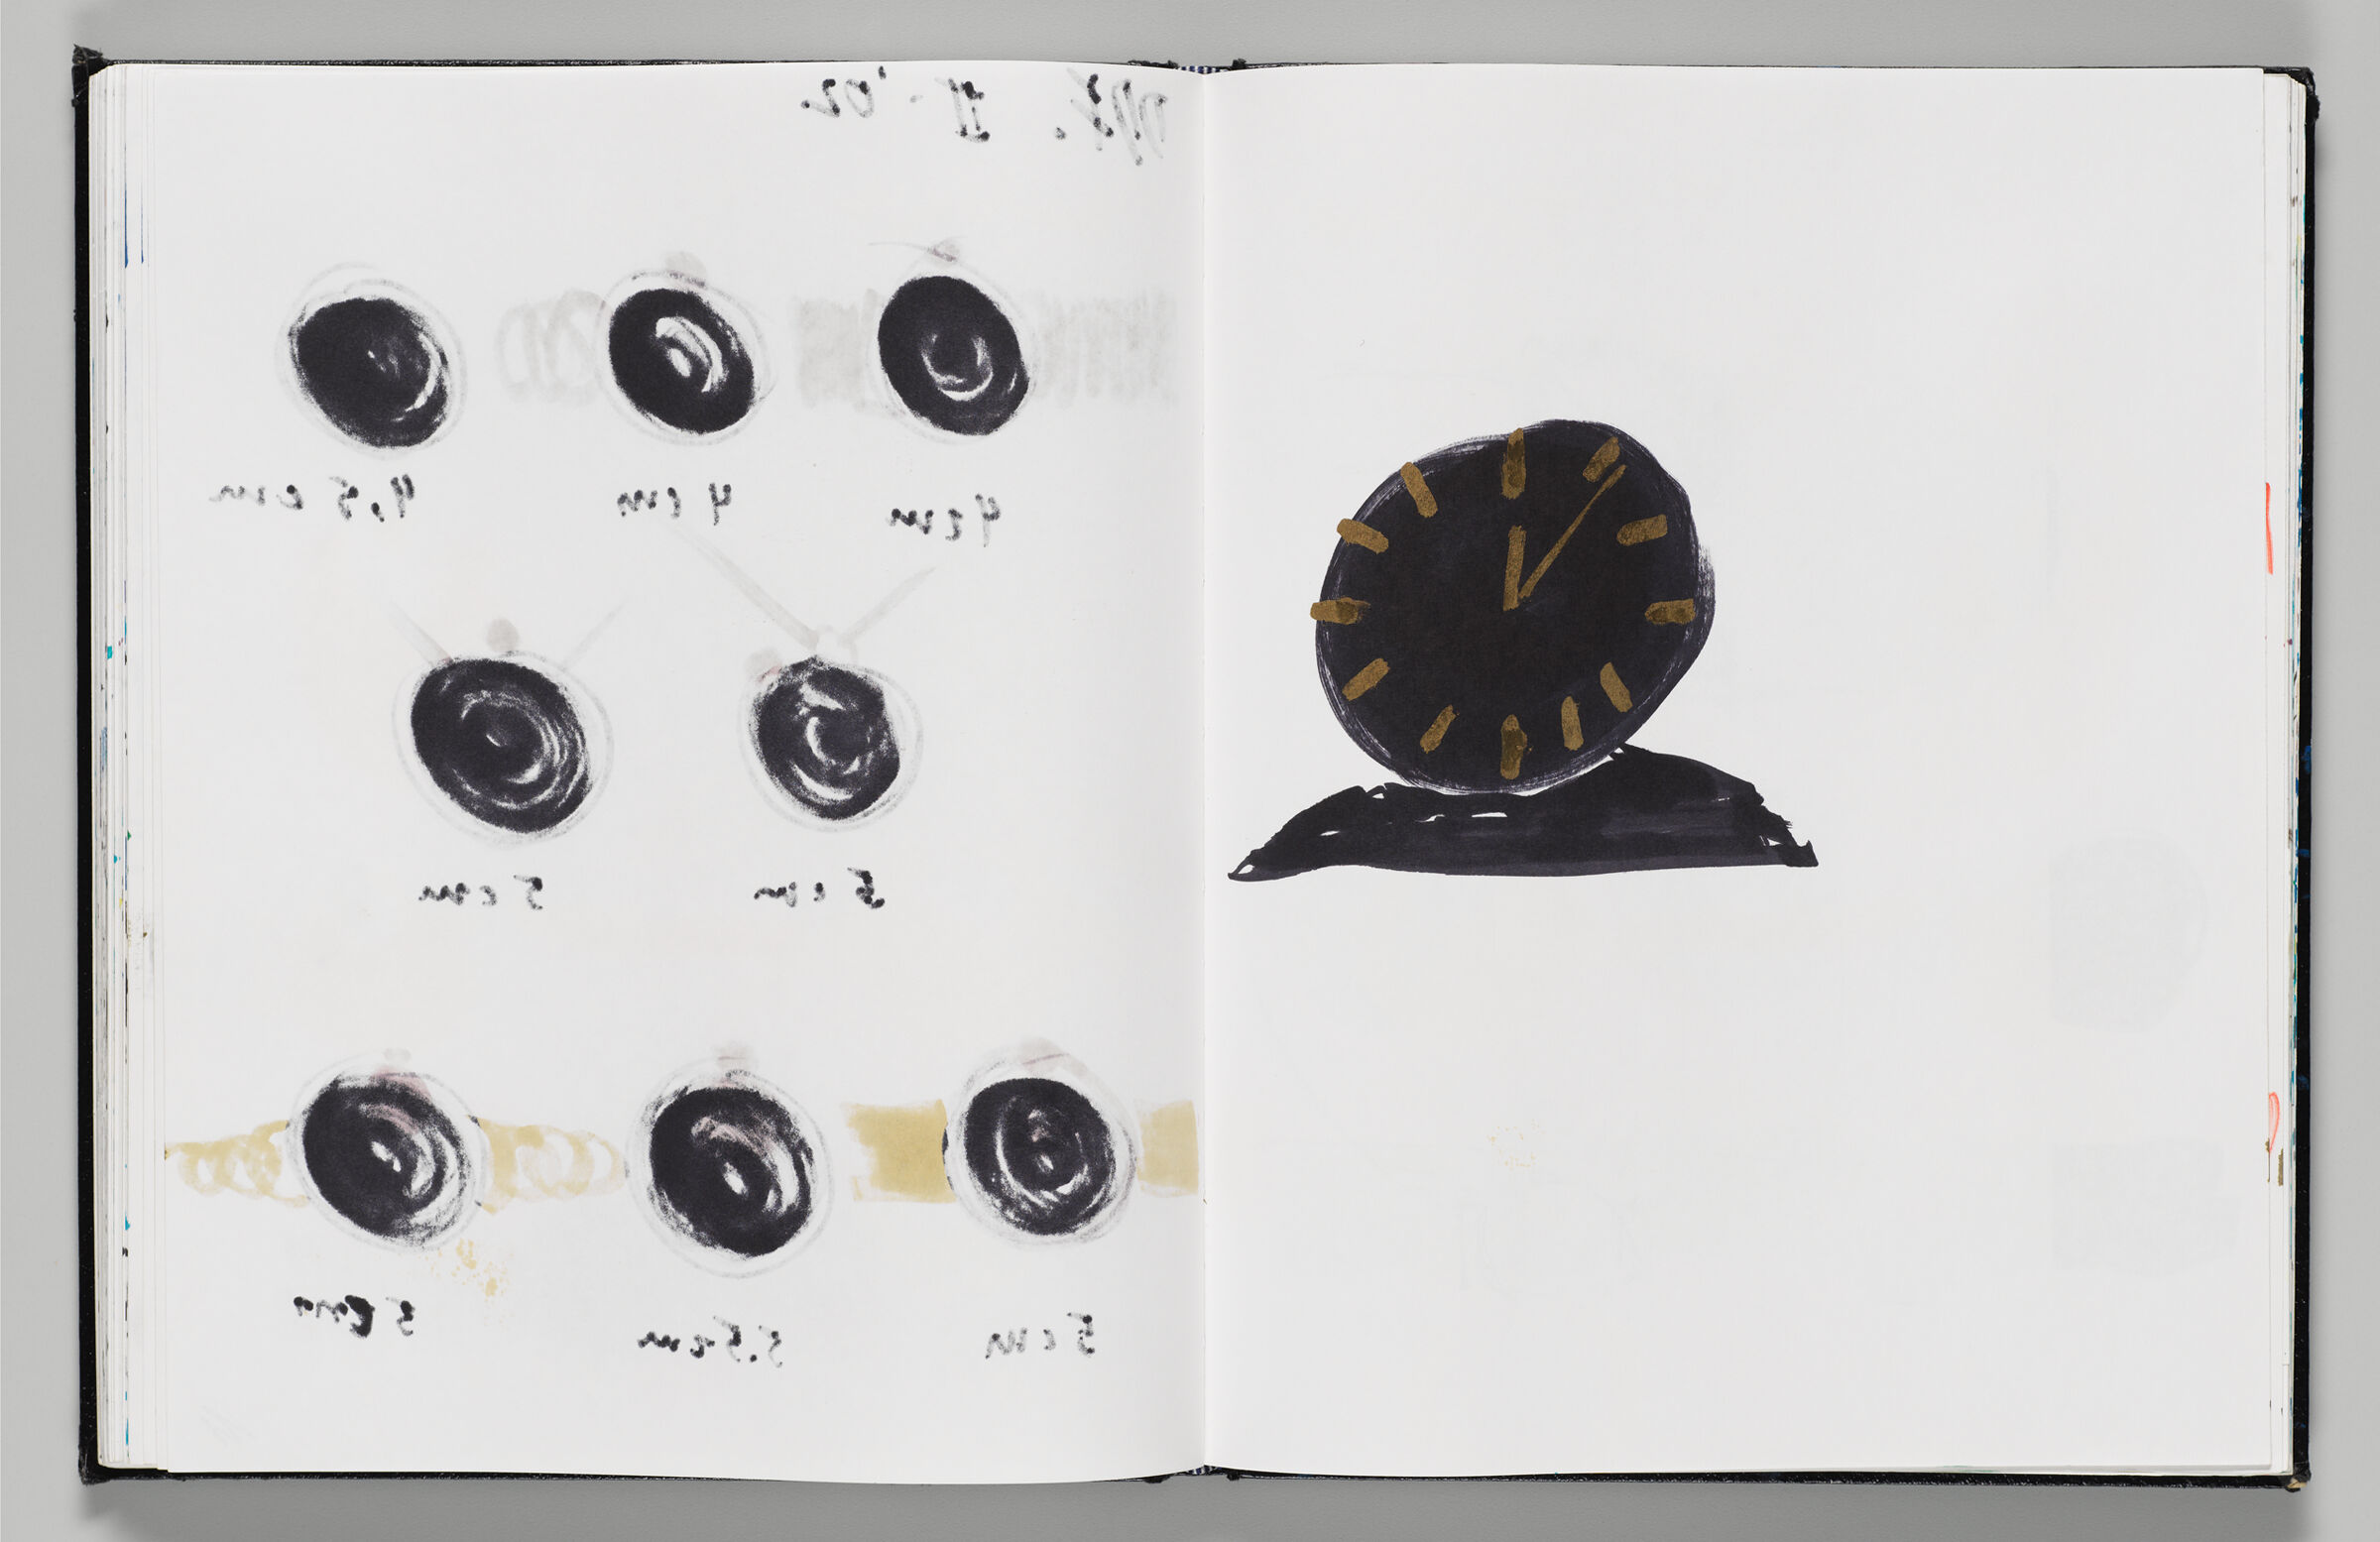 Untitled (Bleed-Through Of Previous Page, Left Page); Untitled (Watch Design, Right Page)